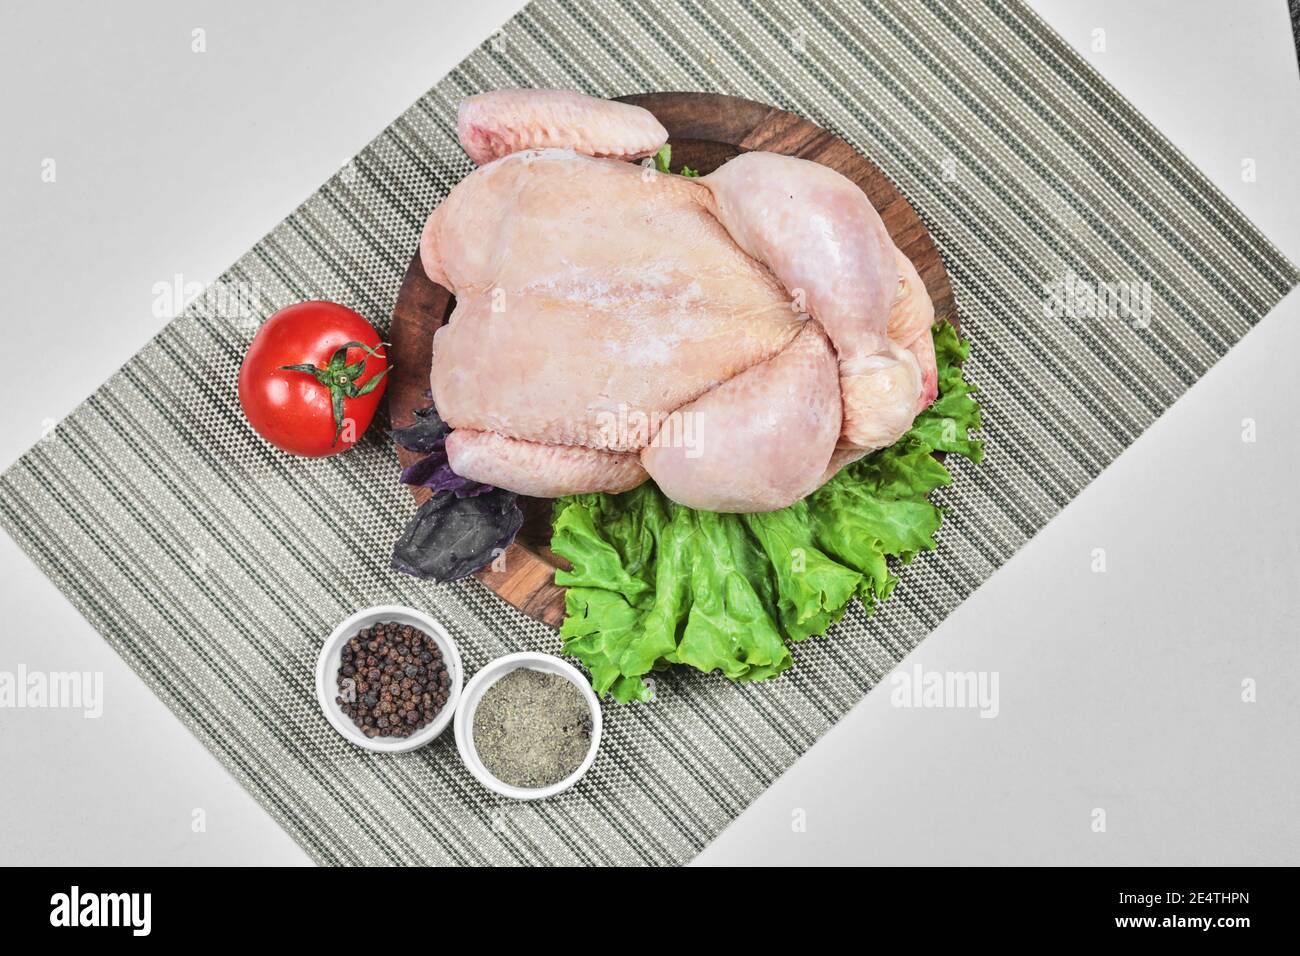 Raw whole chicken on wooden plate with lettuce, tomato and spices Stock Photo